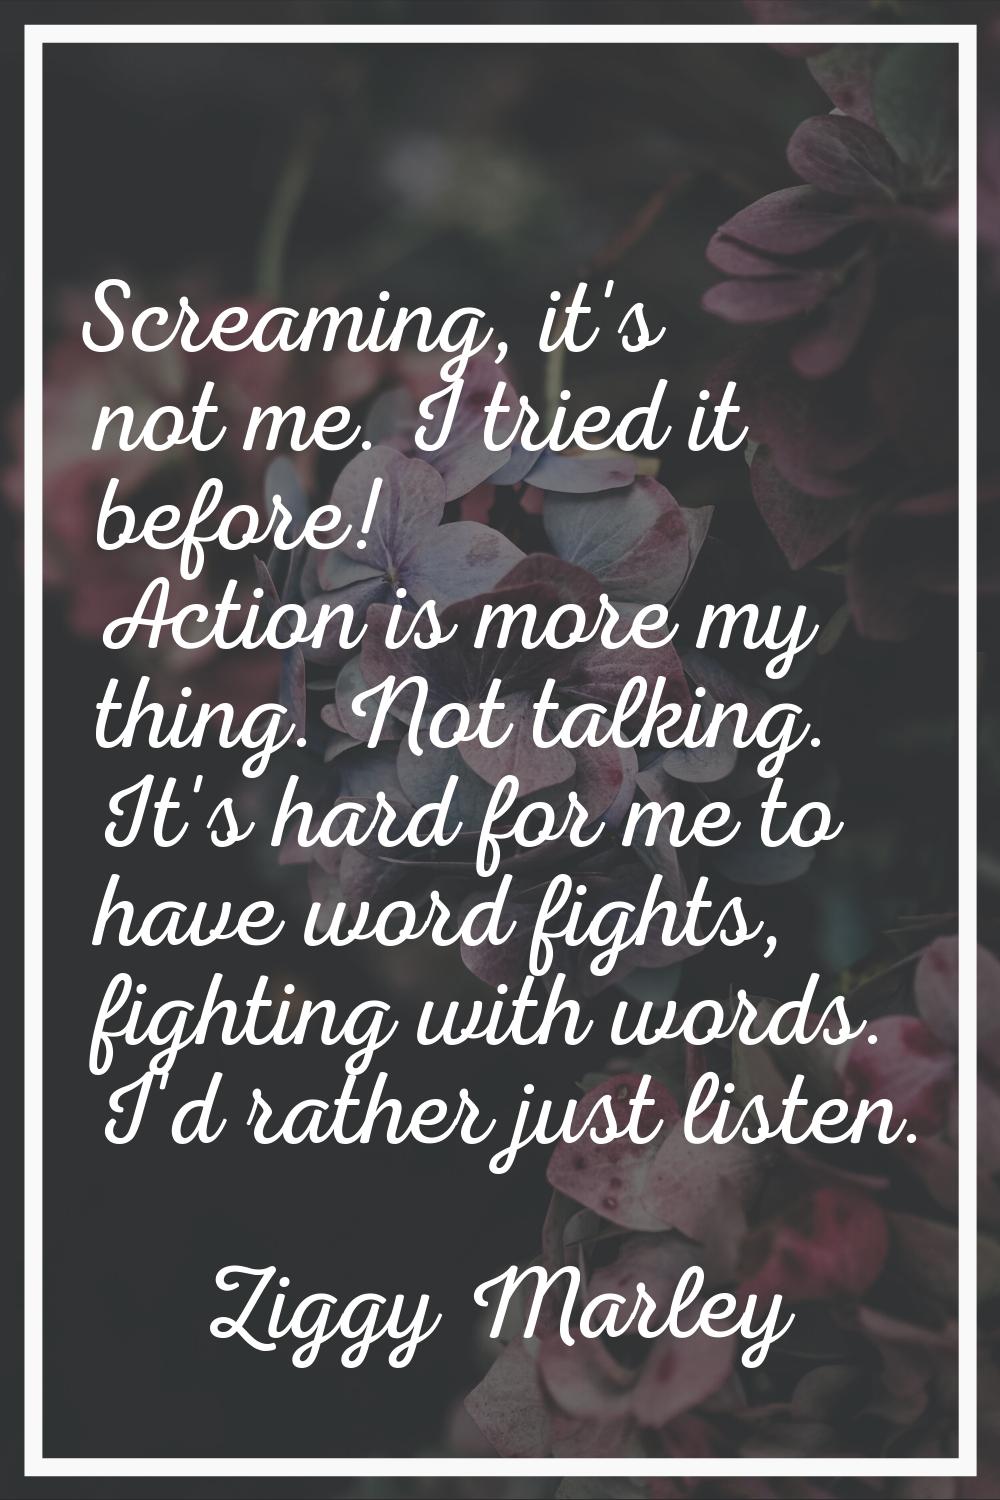 Screaming, it's not me. I tried it before! Action is more my thing. Not talking. It's hard for me t